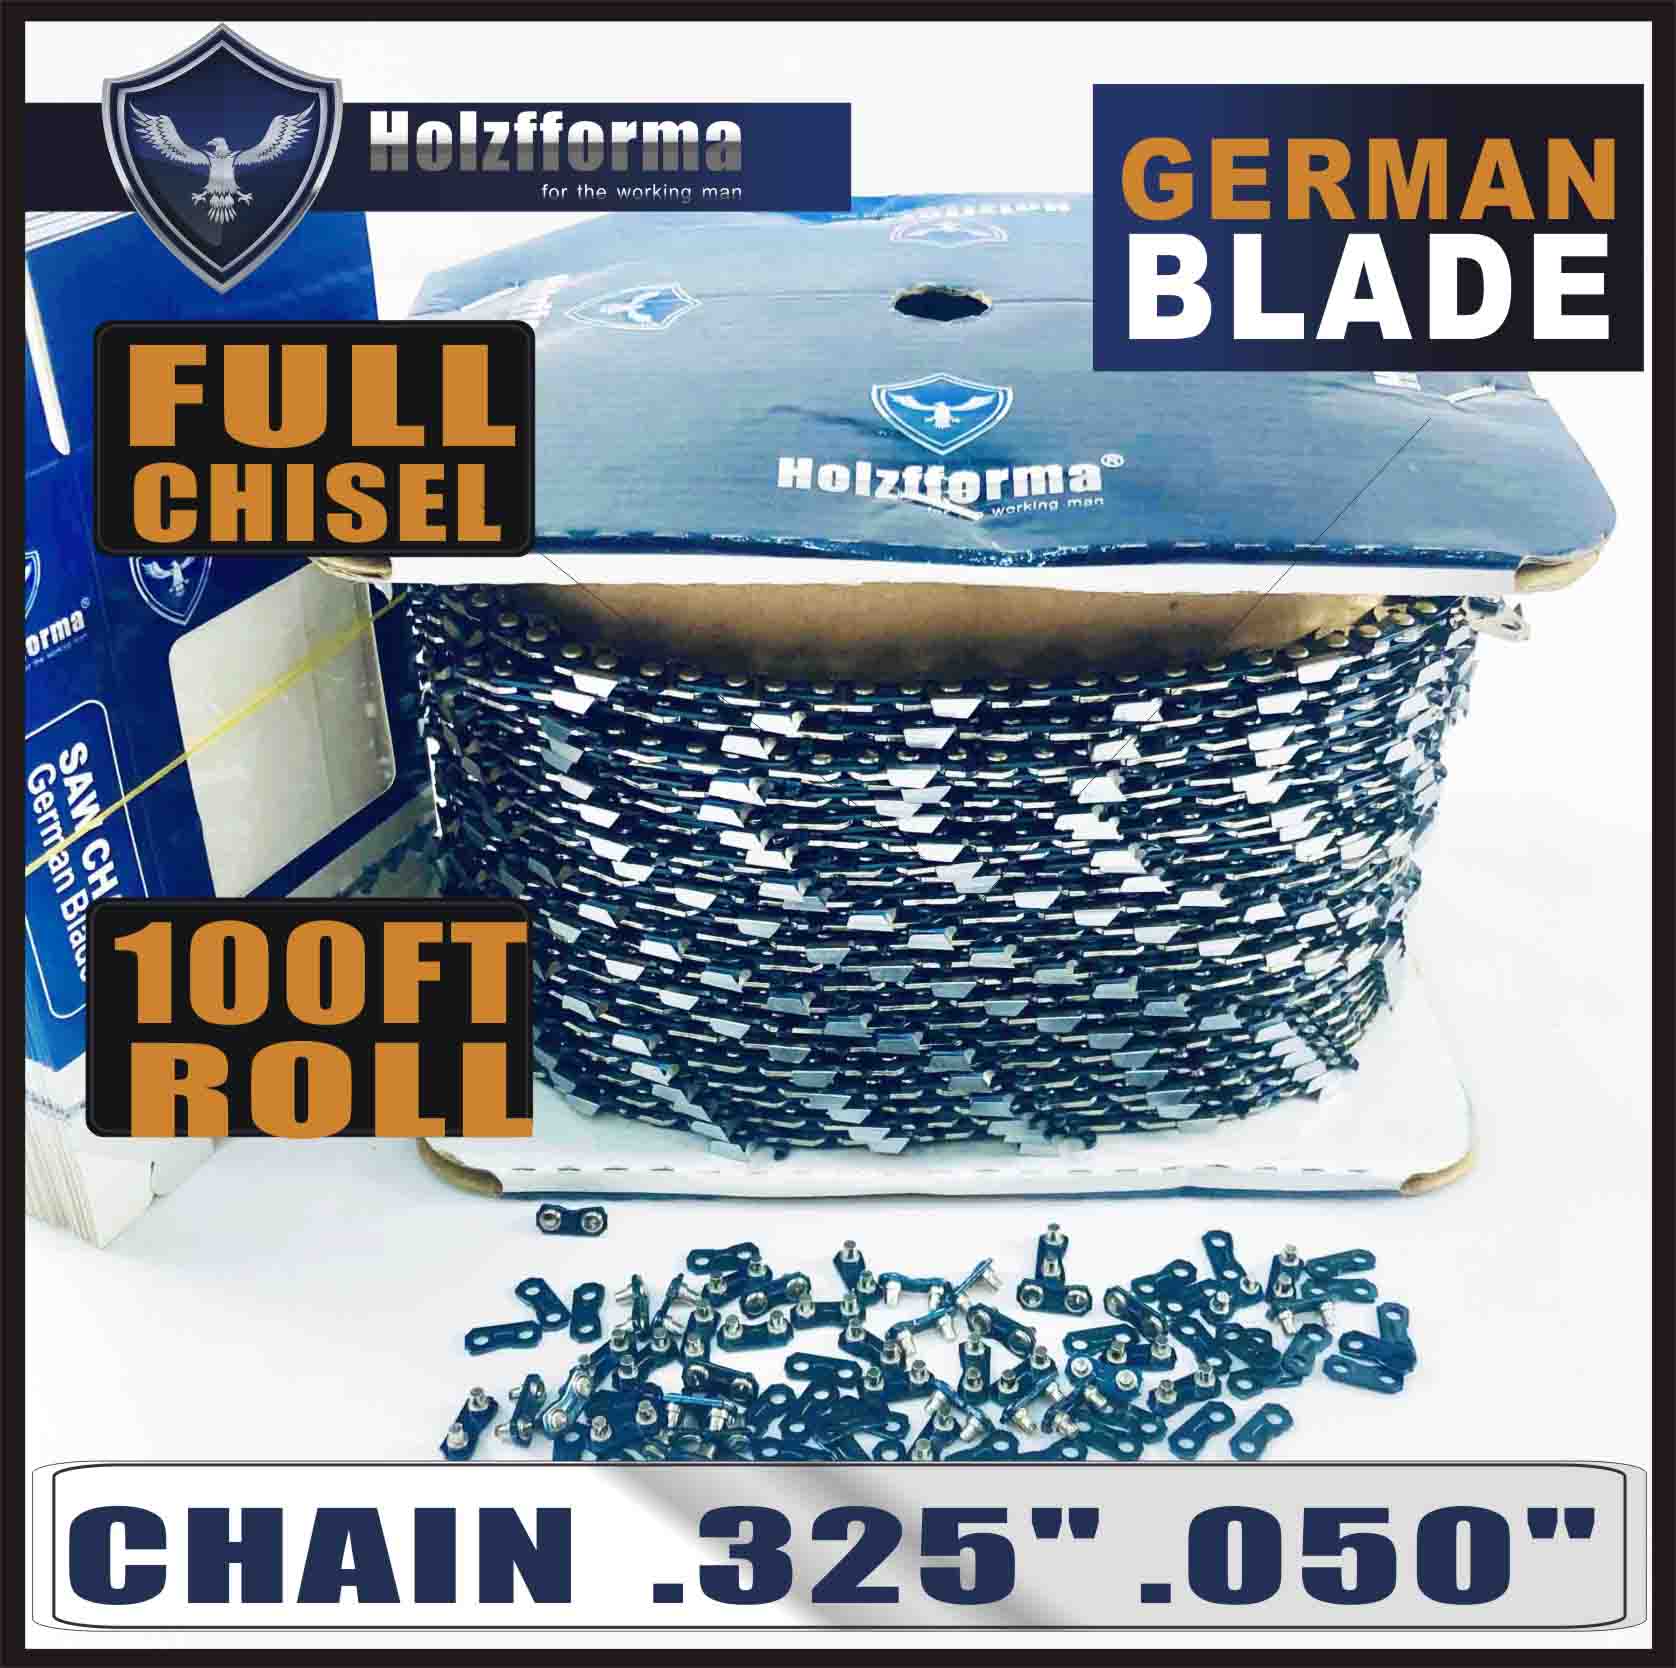 Holzfforma® 100FT Roll .325” .050'' Full Chisel Saw Chain With 40 Sets Matched Connecting links and 25 Boxes